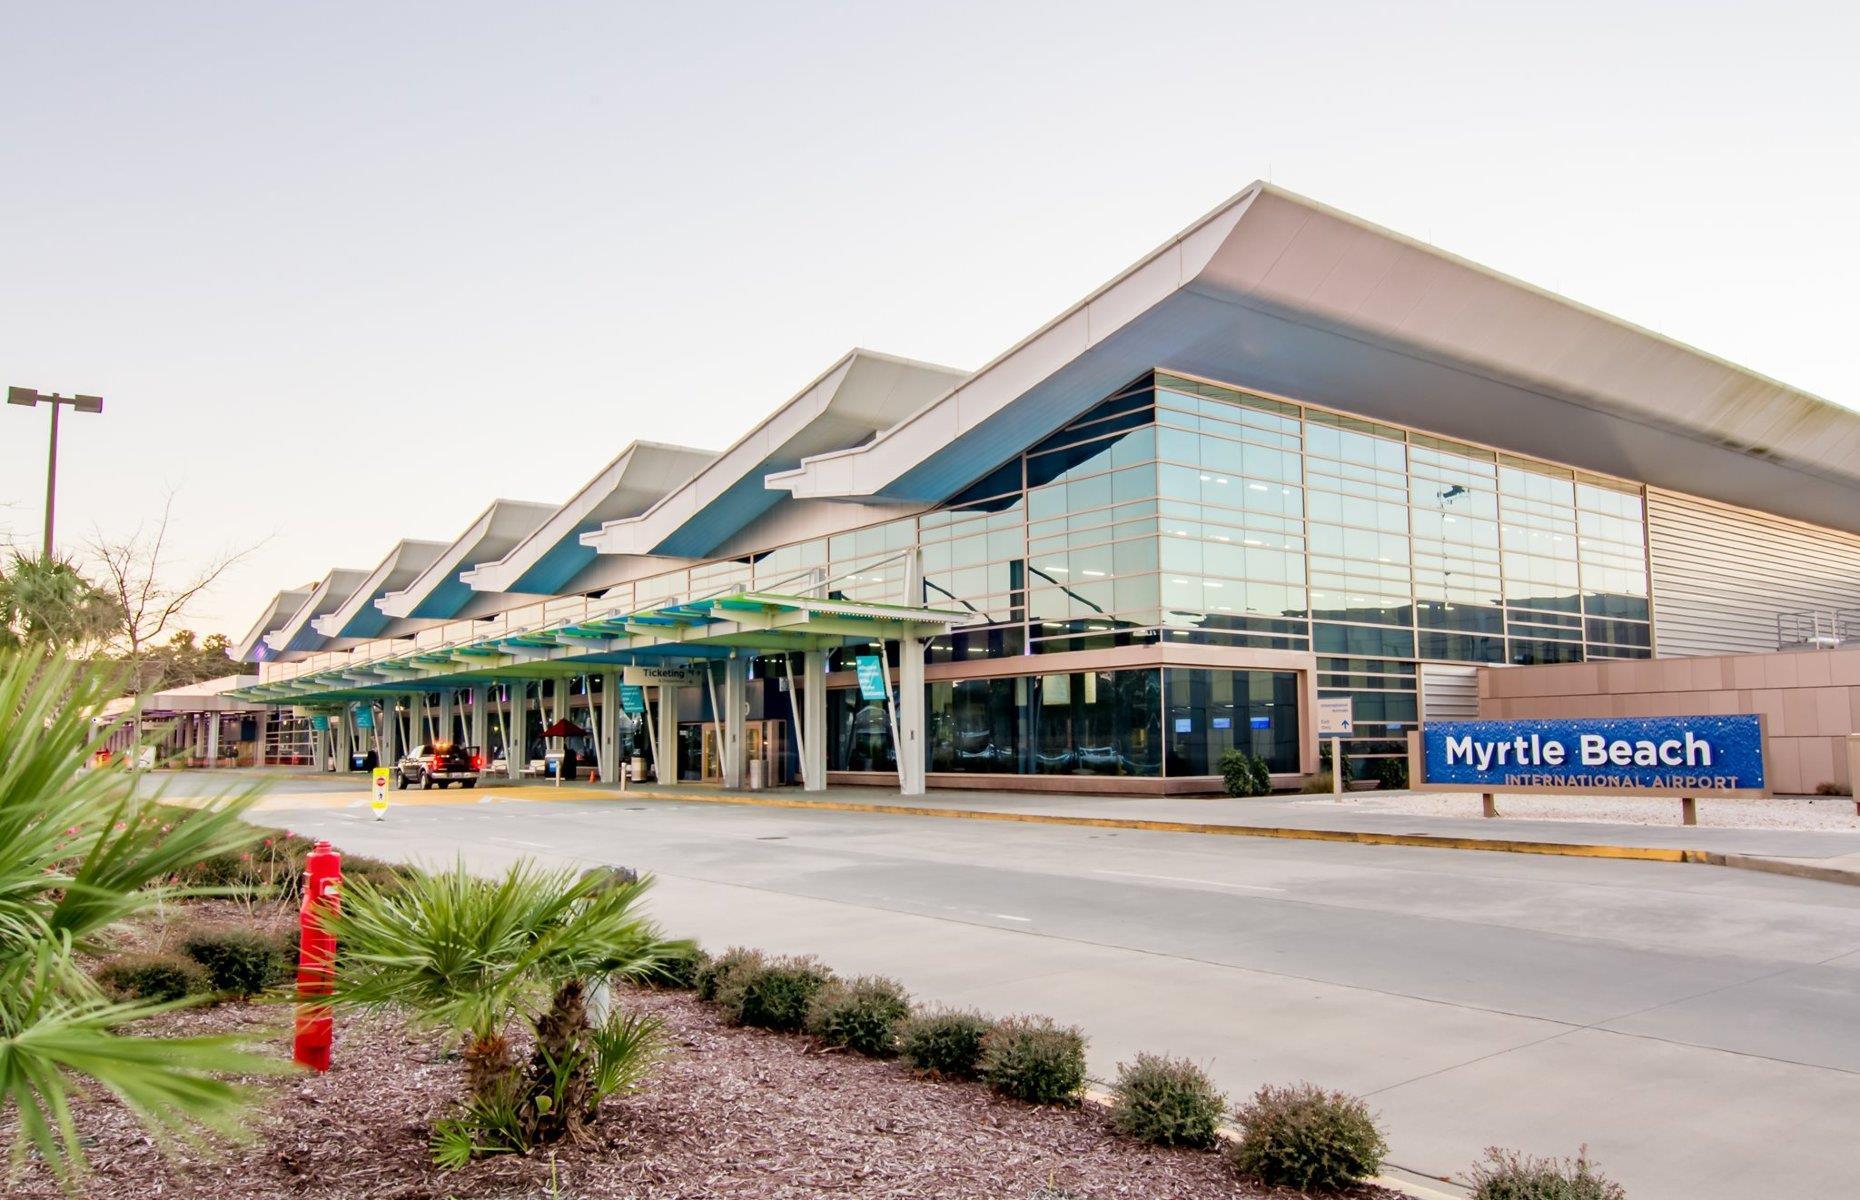 <p>Named the best small airport in the country <a href="https://www.10best.com/awards/travel/best-small-airport-2020/">by readers of USA Today</a>, <a href="https://www.flymyrtlebeach.com/">Myrtle Beach</a> has become a traveler favorite thanks to its low-cost flights and ease of travel. Located three miles (5km) southwest of its namesake city, it offers direct flights to more than 50 cities and served a record-breaking <a href="https://www.postandcourier.com/myrtle-beach/business/myrtle-beach-airport-sets-new-record-with-3-2-million-passengers-in-2021/article_adbe4cdc-795d-11ec-a6df-fb9d0c57f420.html?fr=operanews">3.2 million passengers in 2021</a> despite the ongoing pandemic. It’s widely praised for its clean, attractive interiors and easy-to-navigate layout, while TSA lines are said to be short.</p>